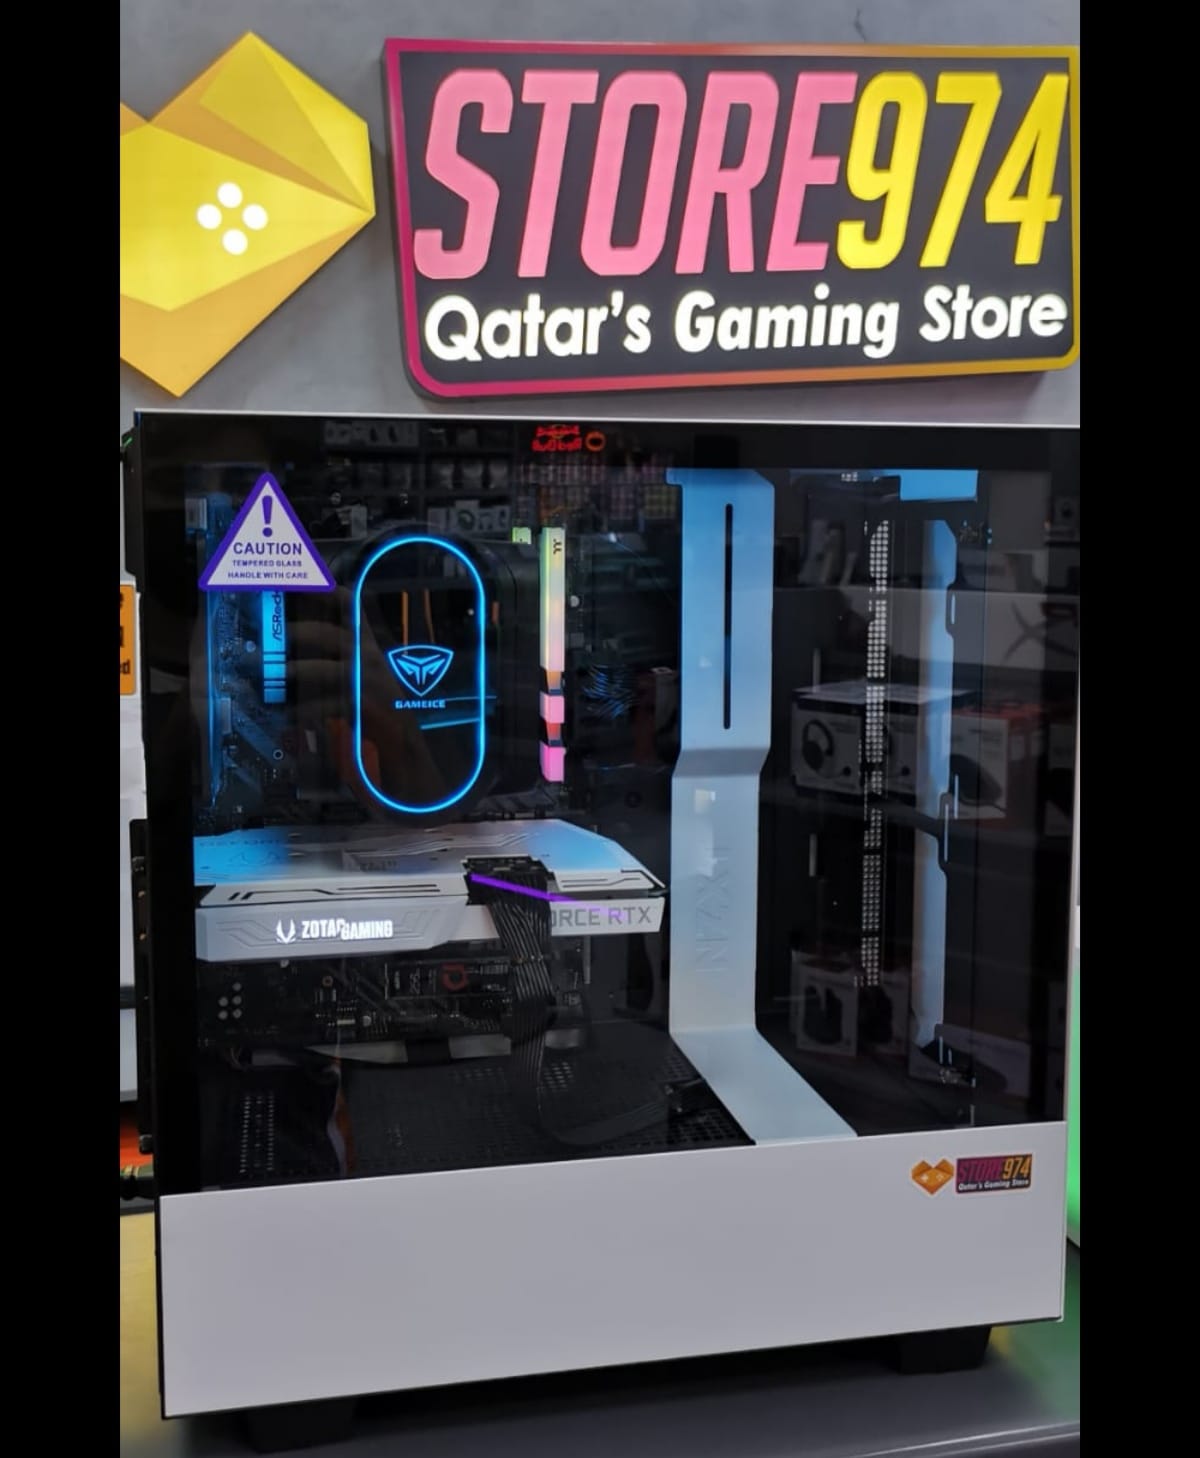 ( Pre-Owned ) Gaming PC Intel i5-10600K w/ Zotac RTX 3070 - Store 974 | ستور ٩٧٤